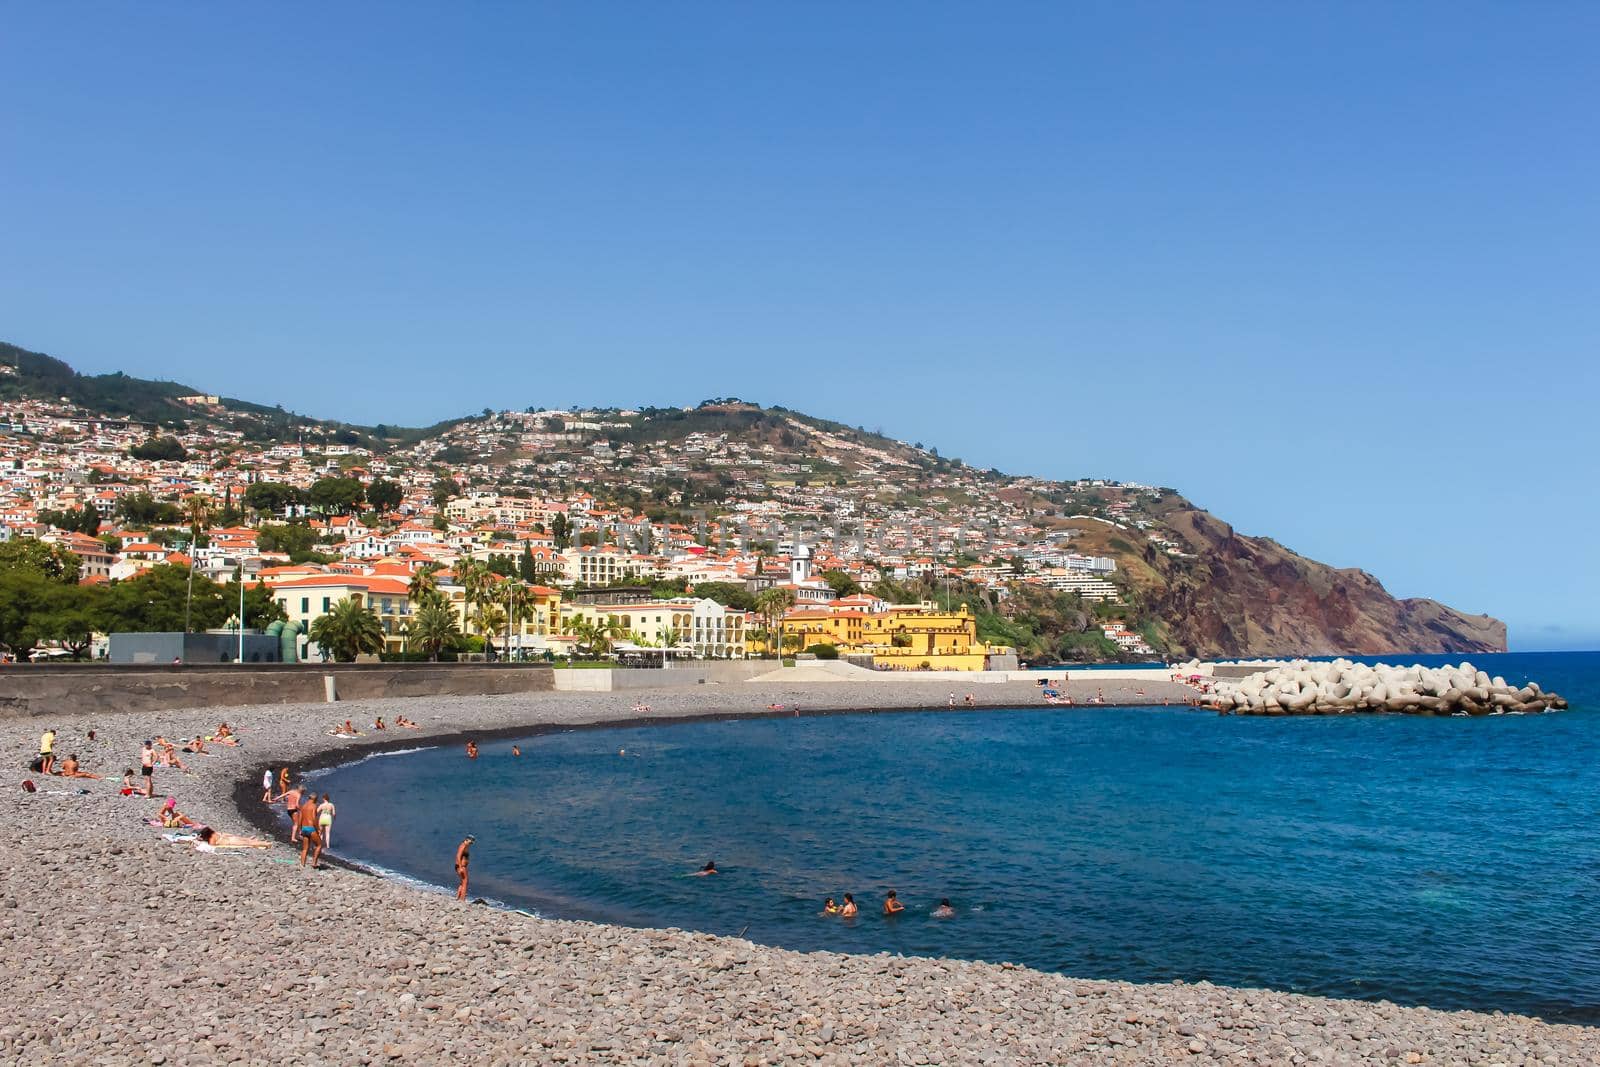 Sunbathers relaxing on the pebble beach coastline of vibrant Funchal, Madeira, Portugal.